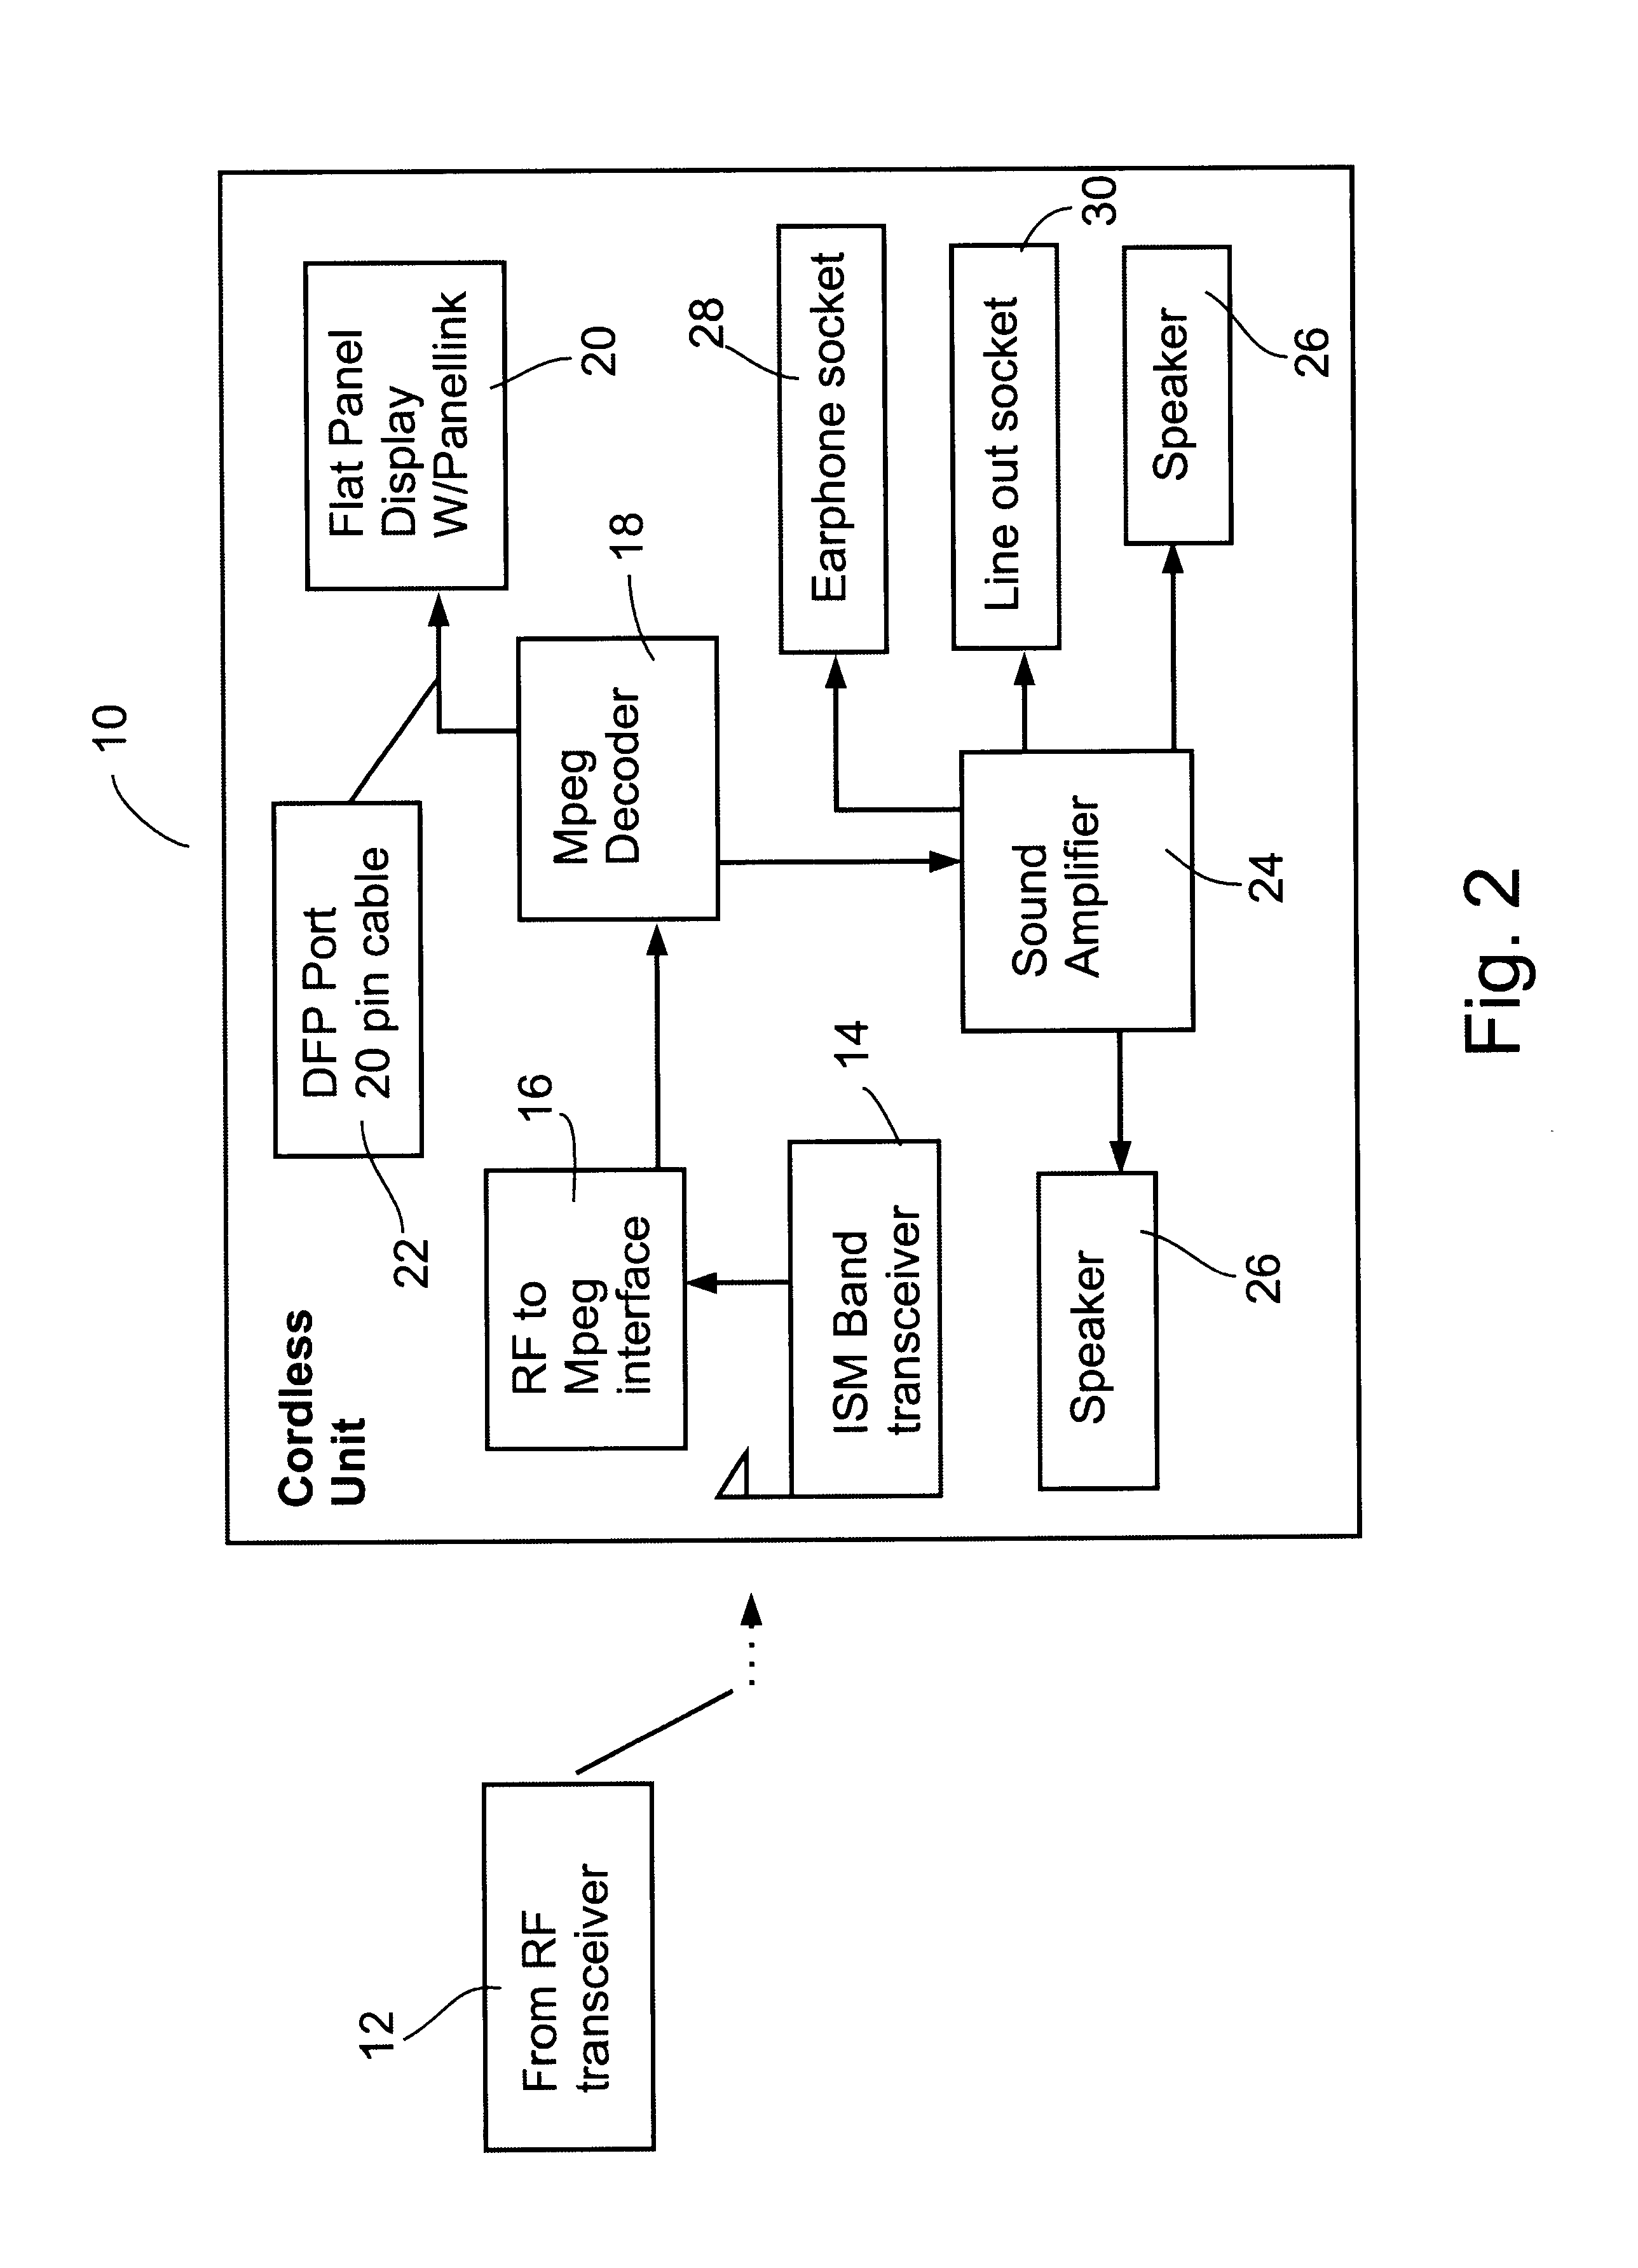 Method for enhancing video compression through automatic data analysis and profile selection